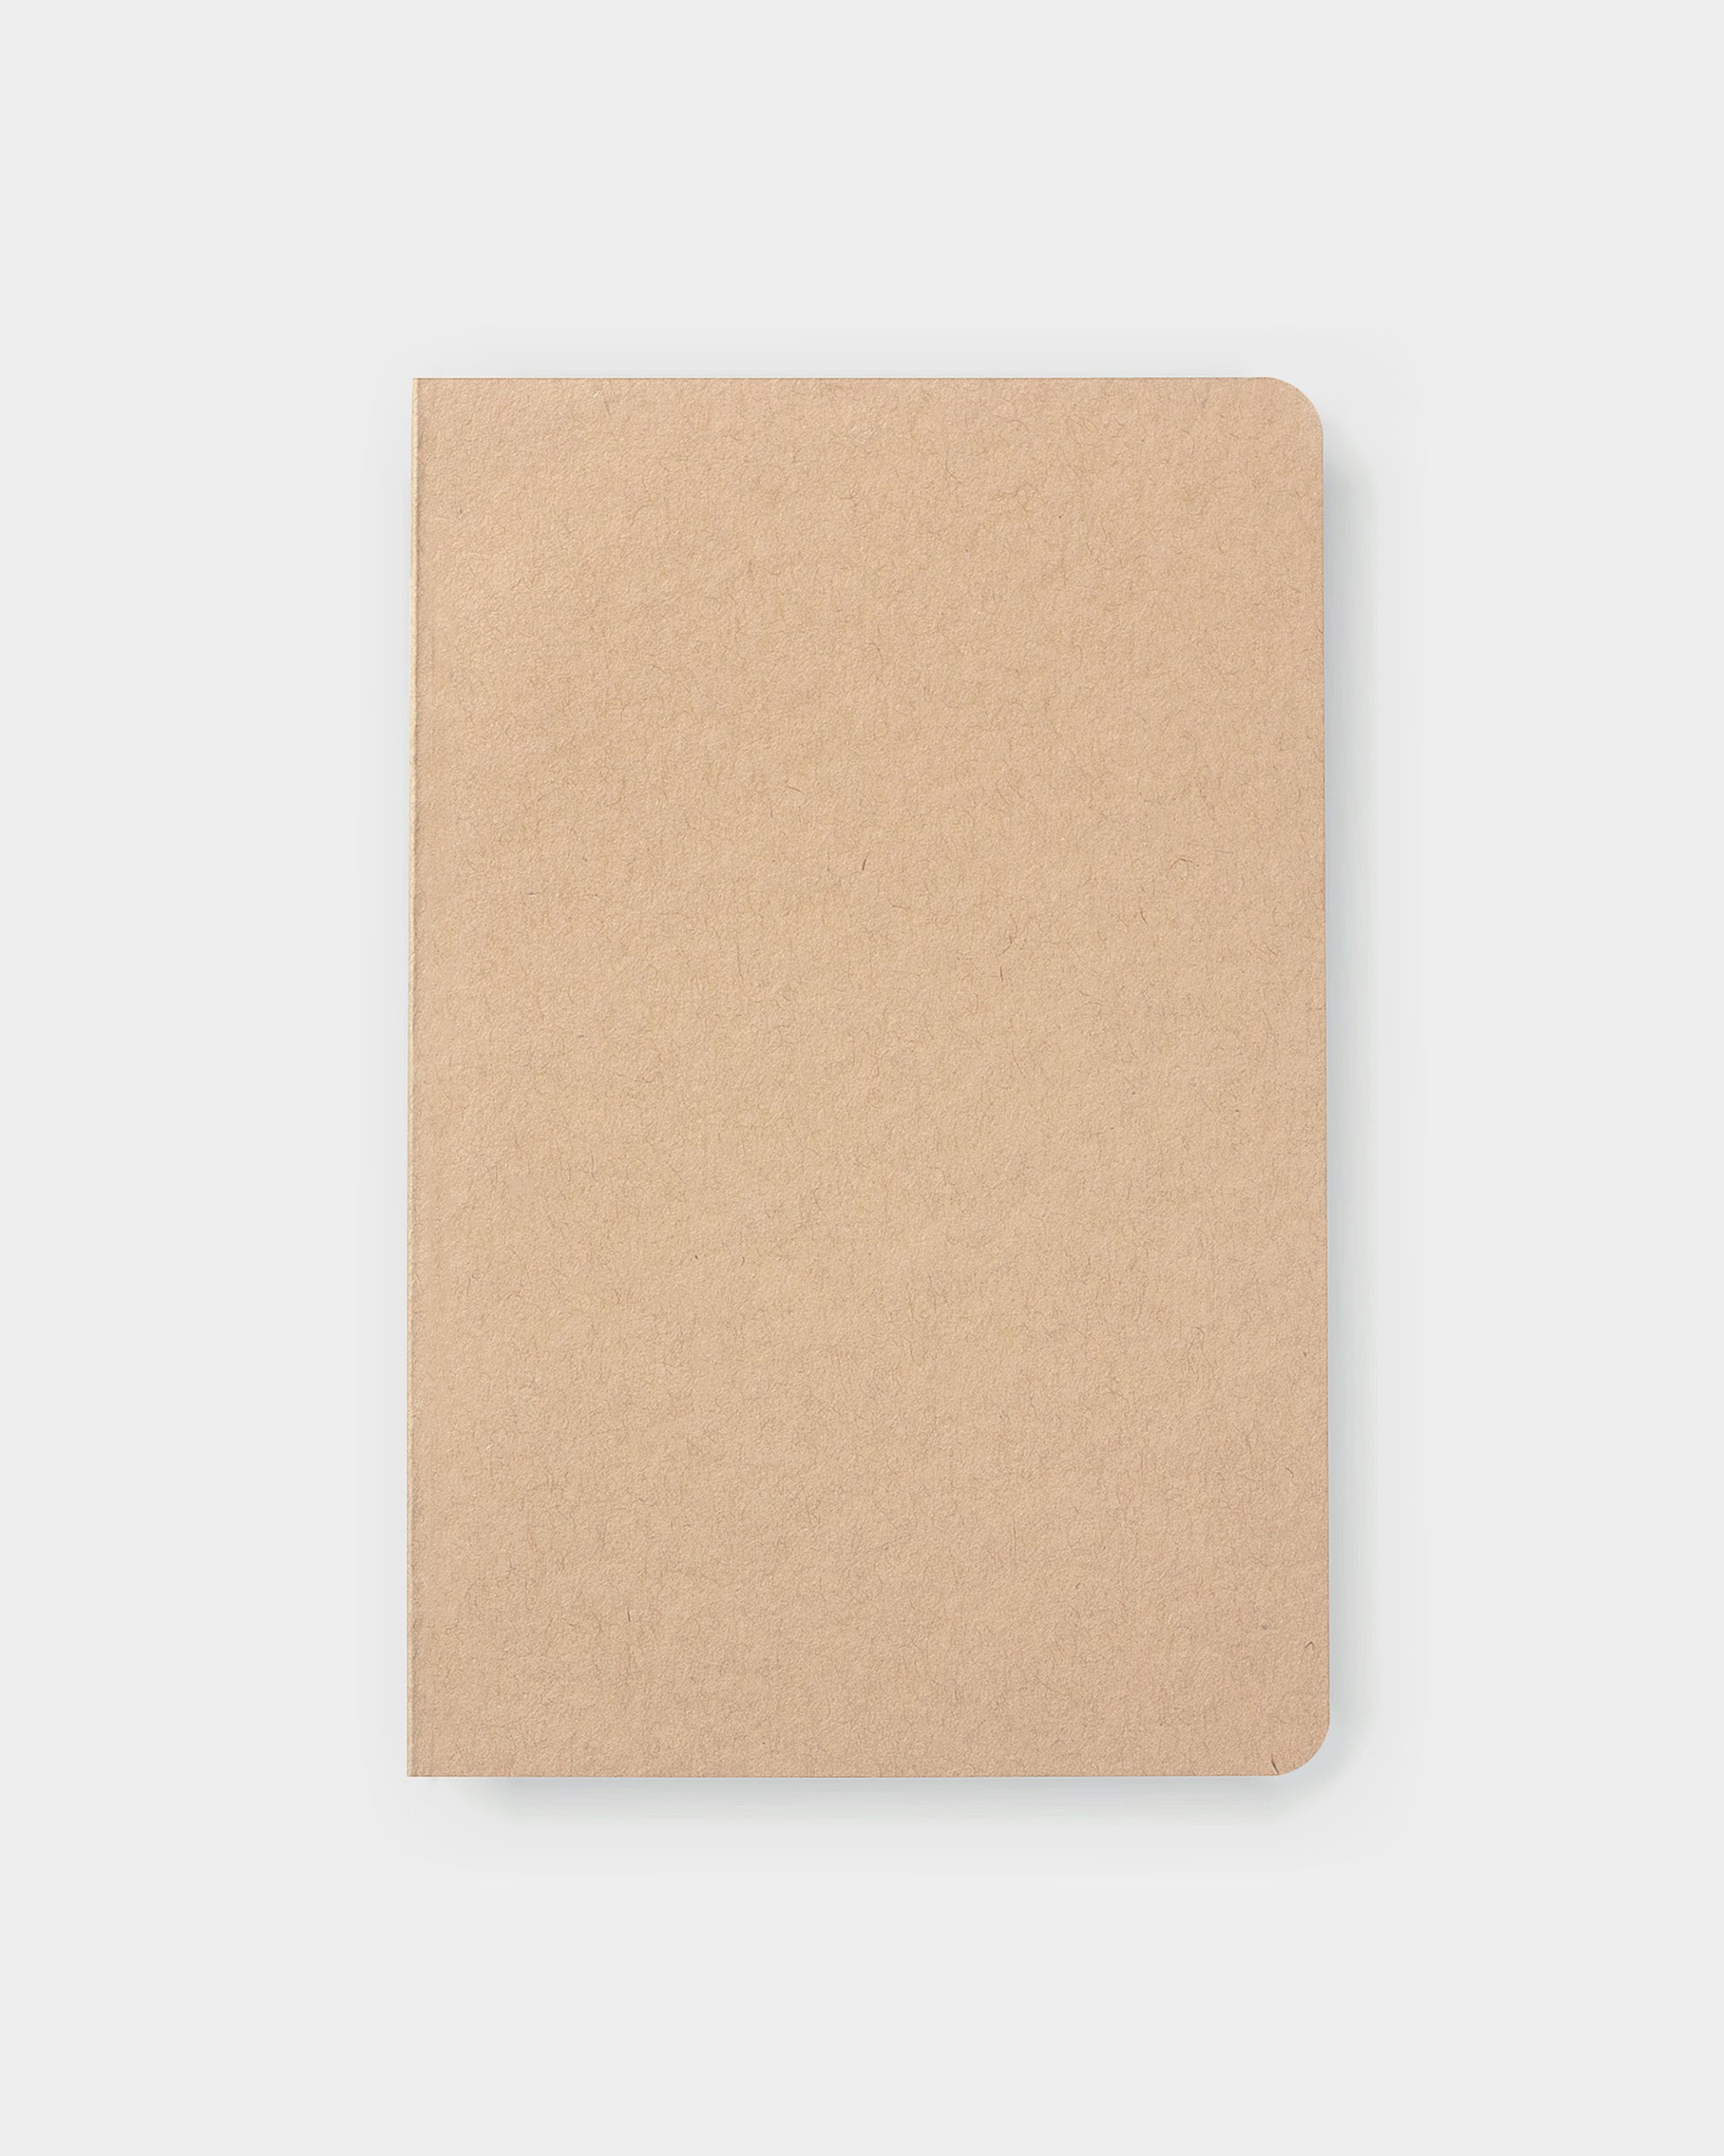 4.25 x 6.5" standard notebook, made with eco-friendly papers. Lined pages, kraft color way.